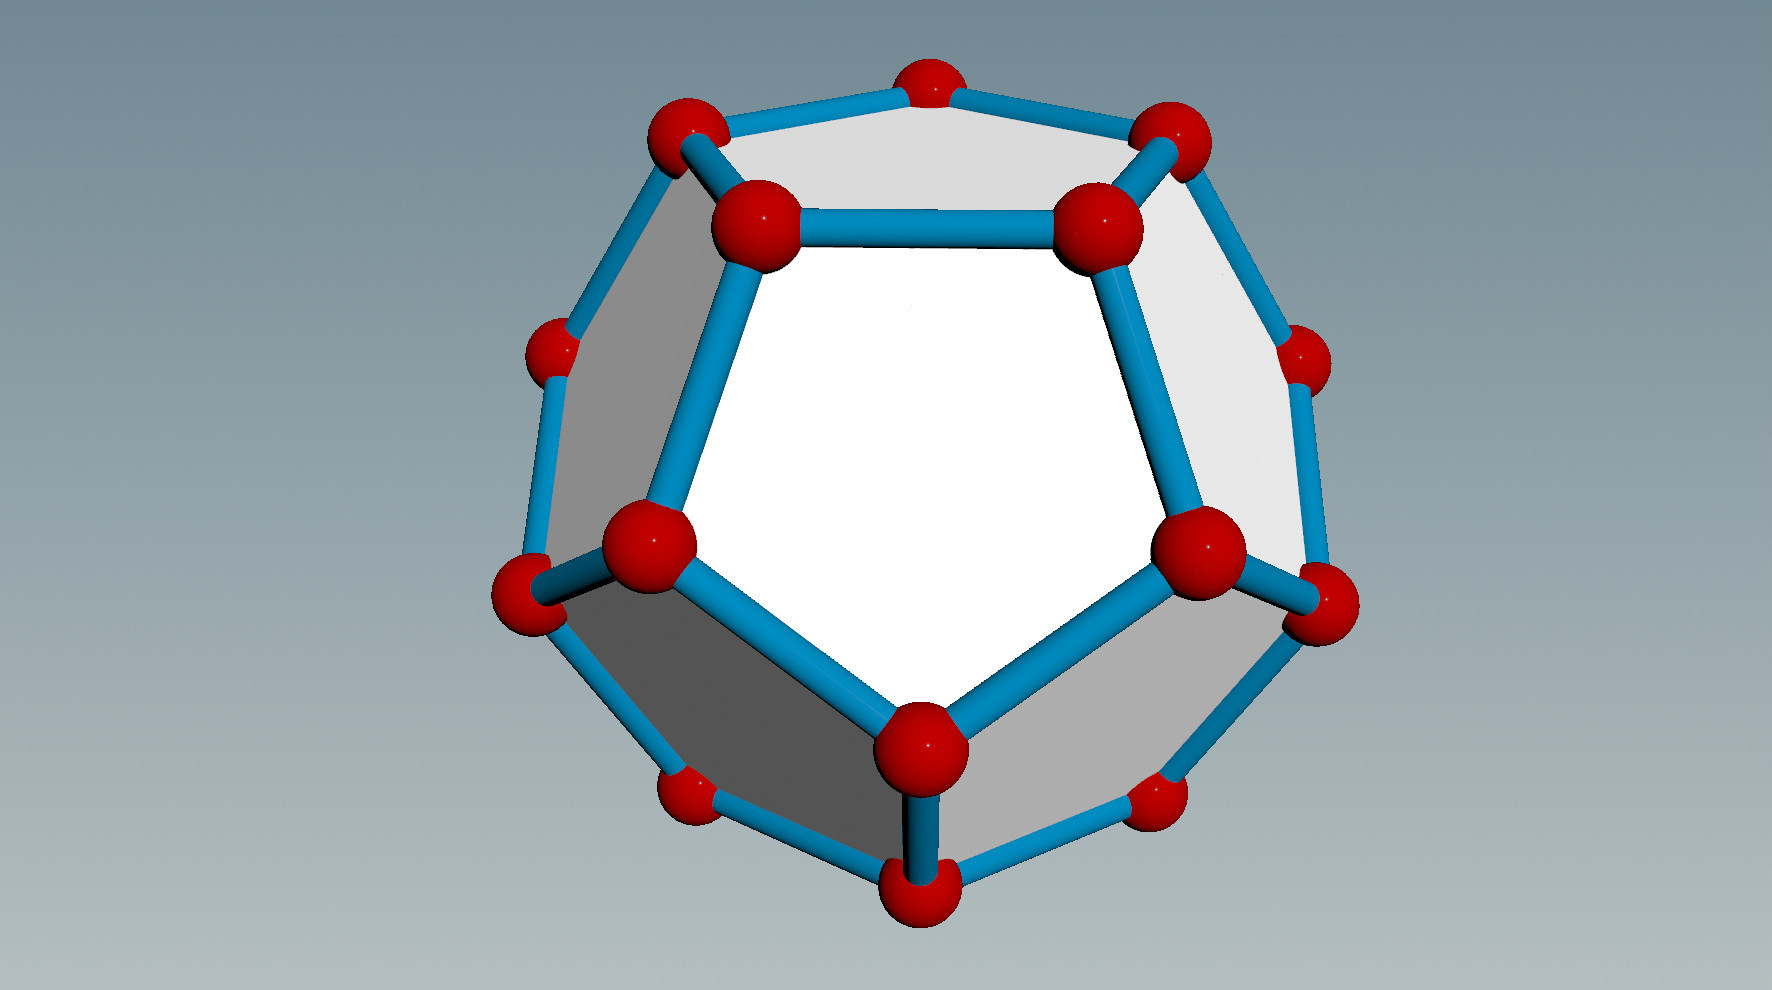 dodecahedron-with-edges-and-points